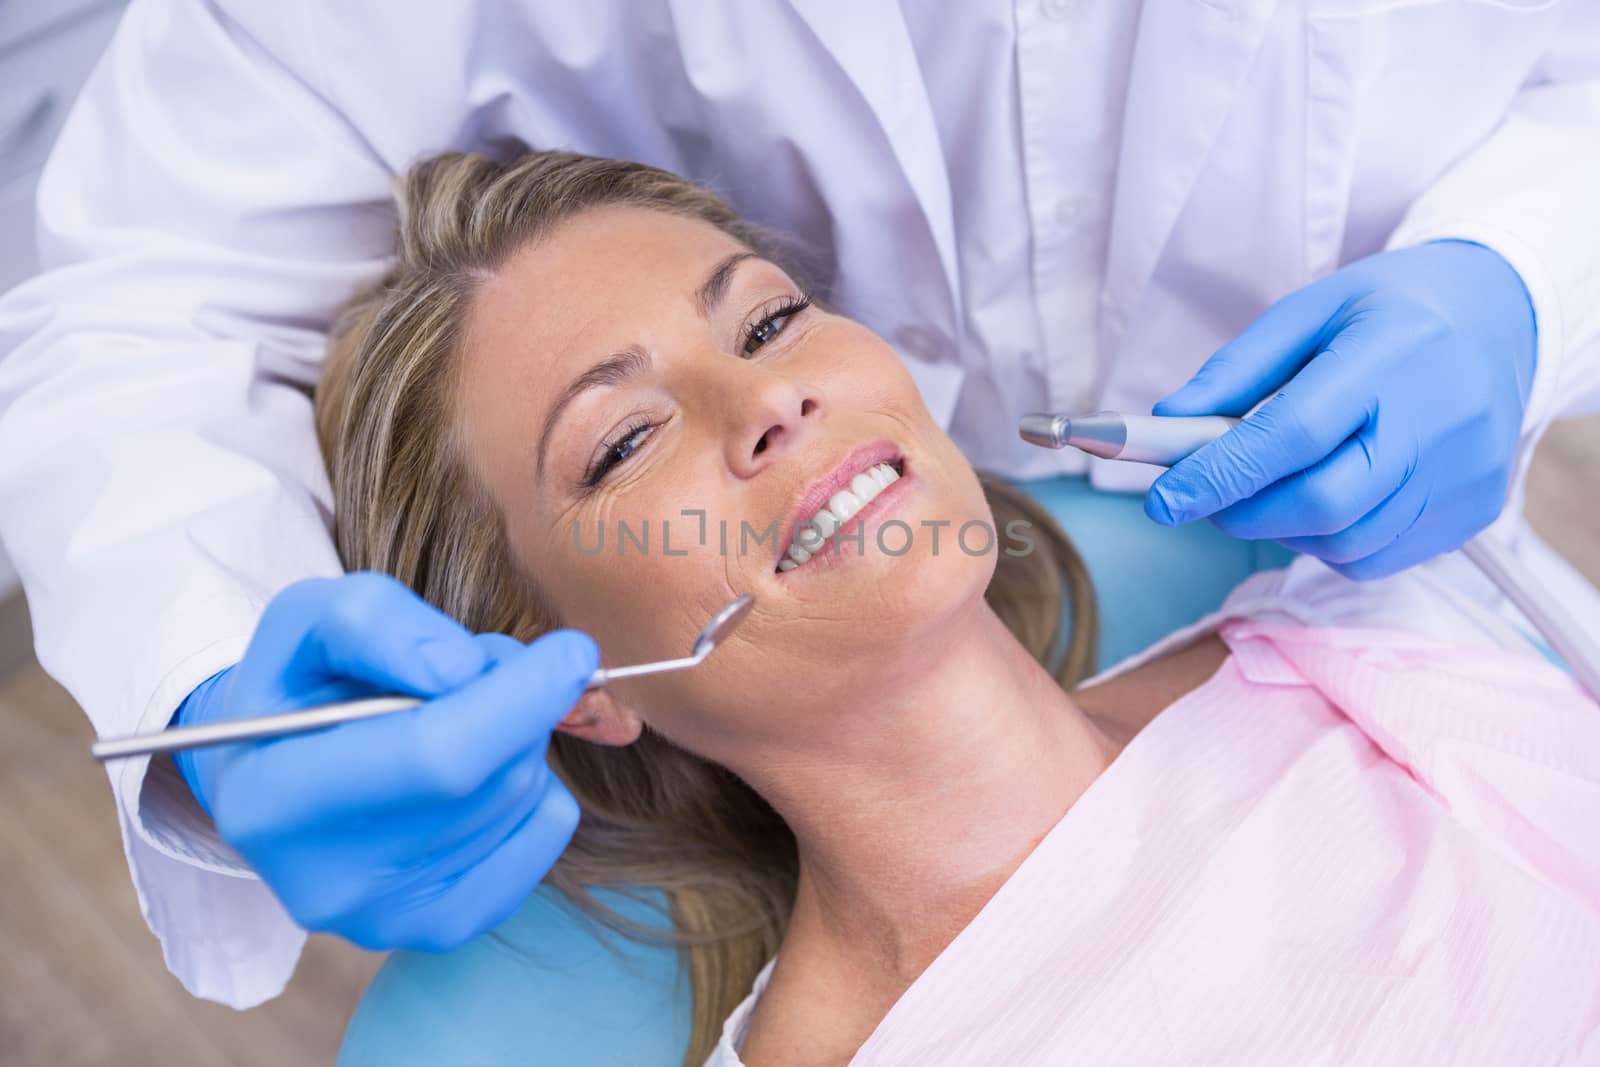 High angle portrait of woman by dentist dolding tool by Wavebreakmedia